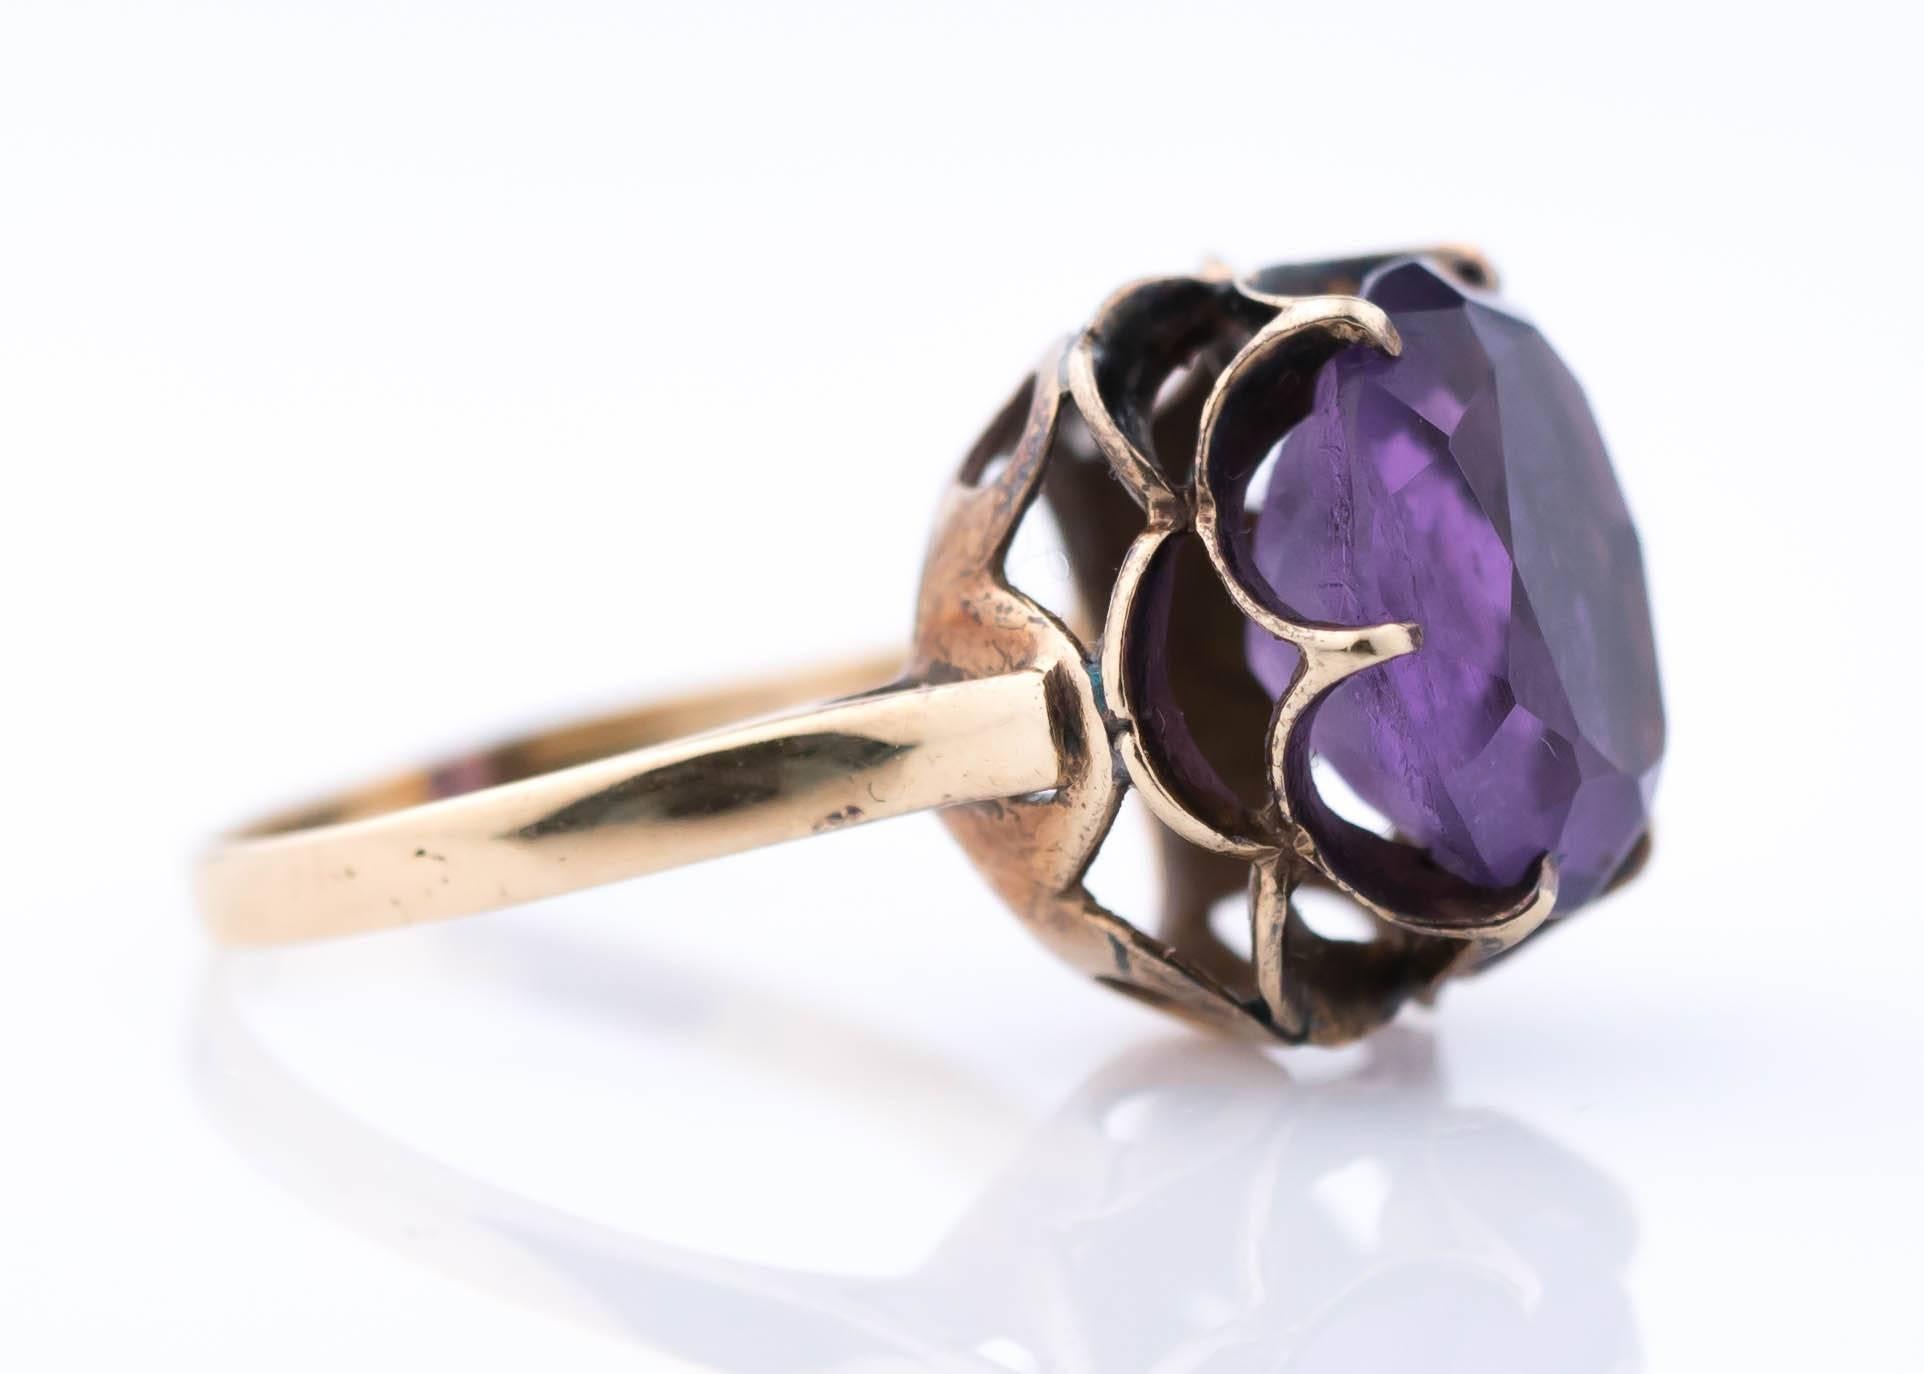 1930s Art Deco Amethyst and 14 Karat Yellow Gold Ring
Features a Cathedral Setting with a Floral Gallery. The setting appears to form small petals behind the center stone. 
The Oval, medium Purple Amethyst is securely set with 6 prongs. 

The